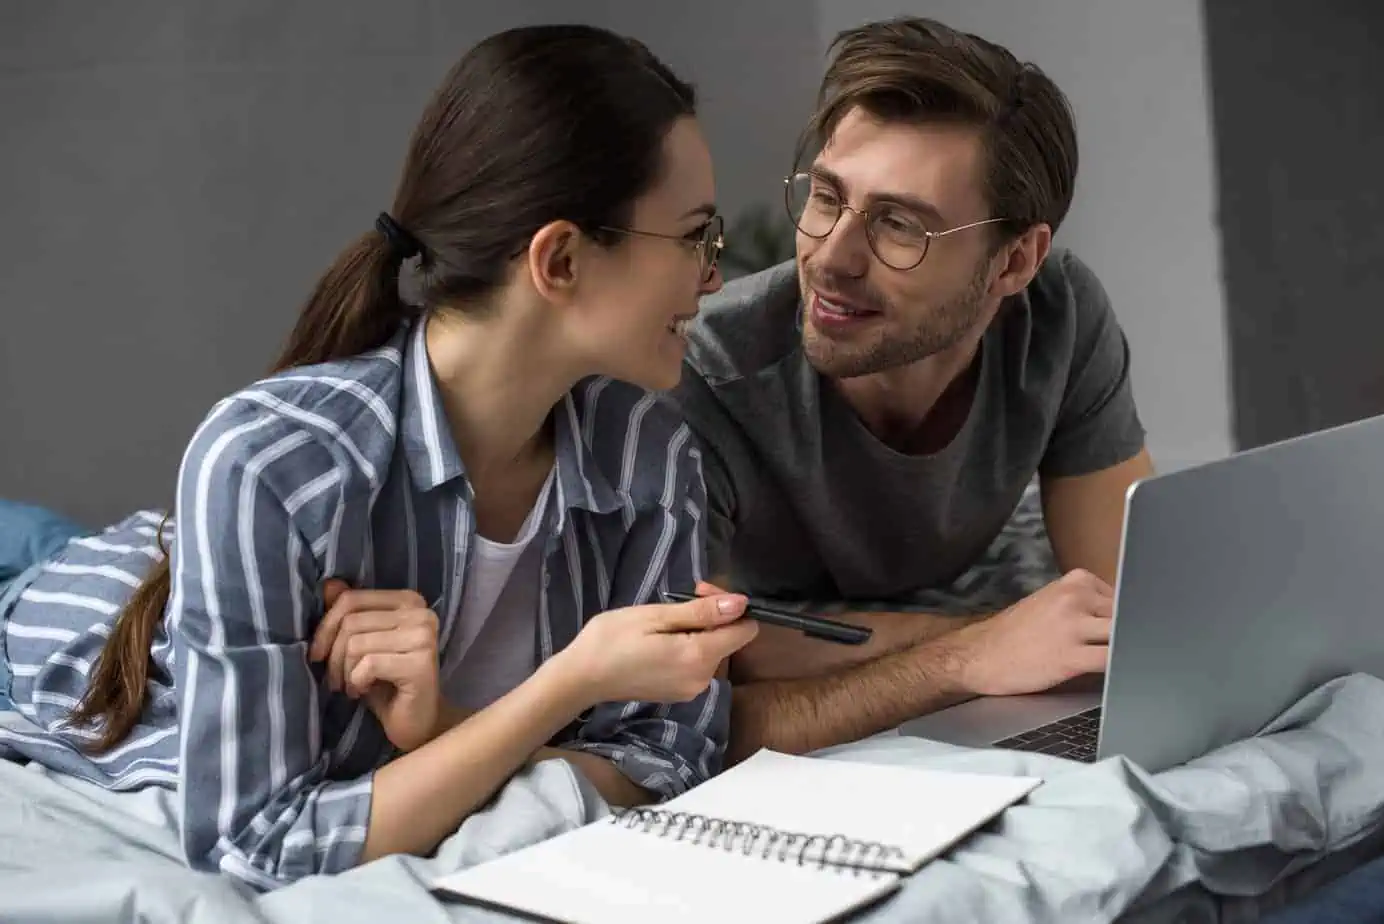 A man and a woman looking at a laptop